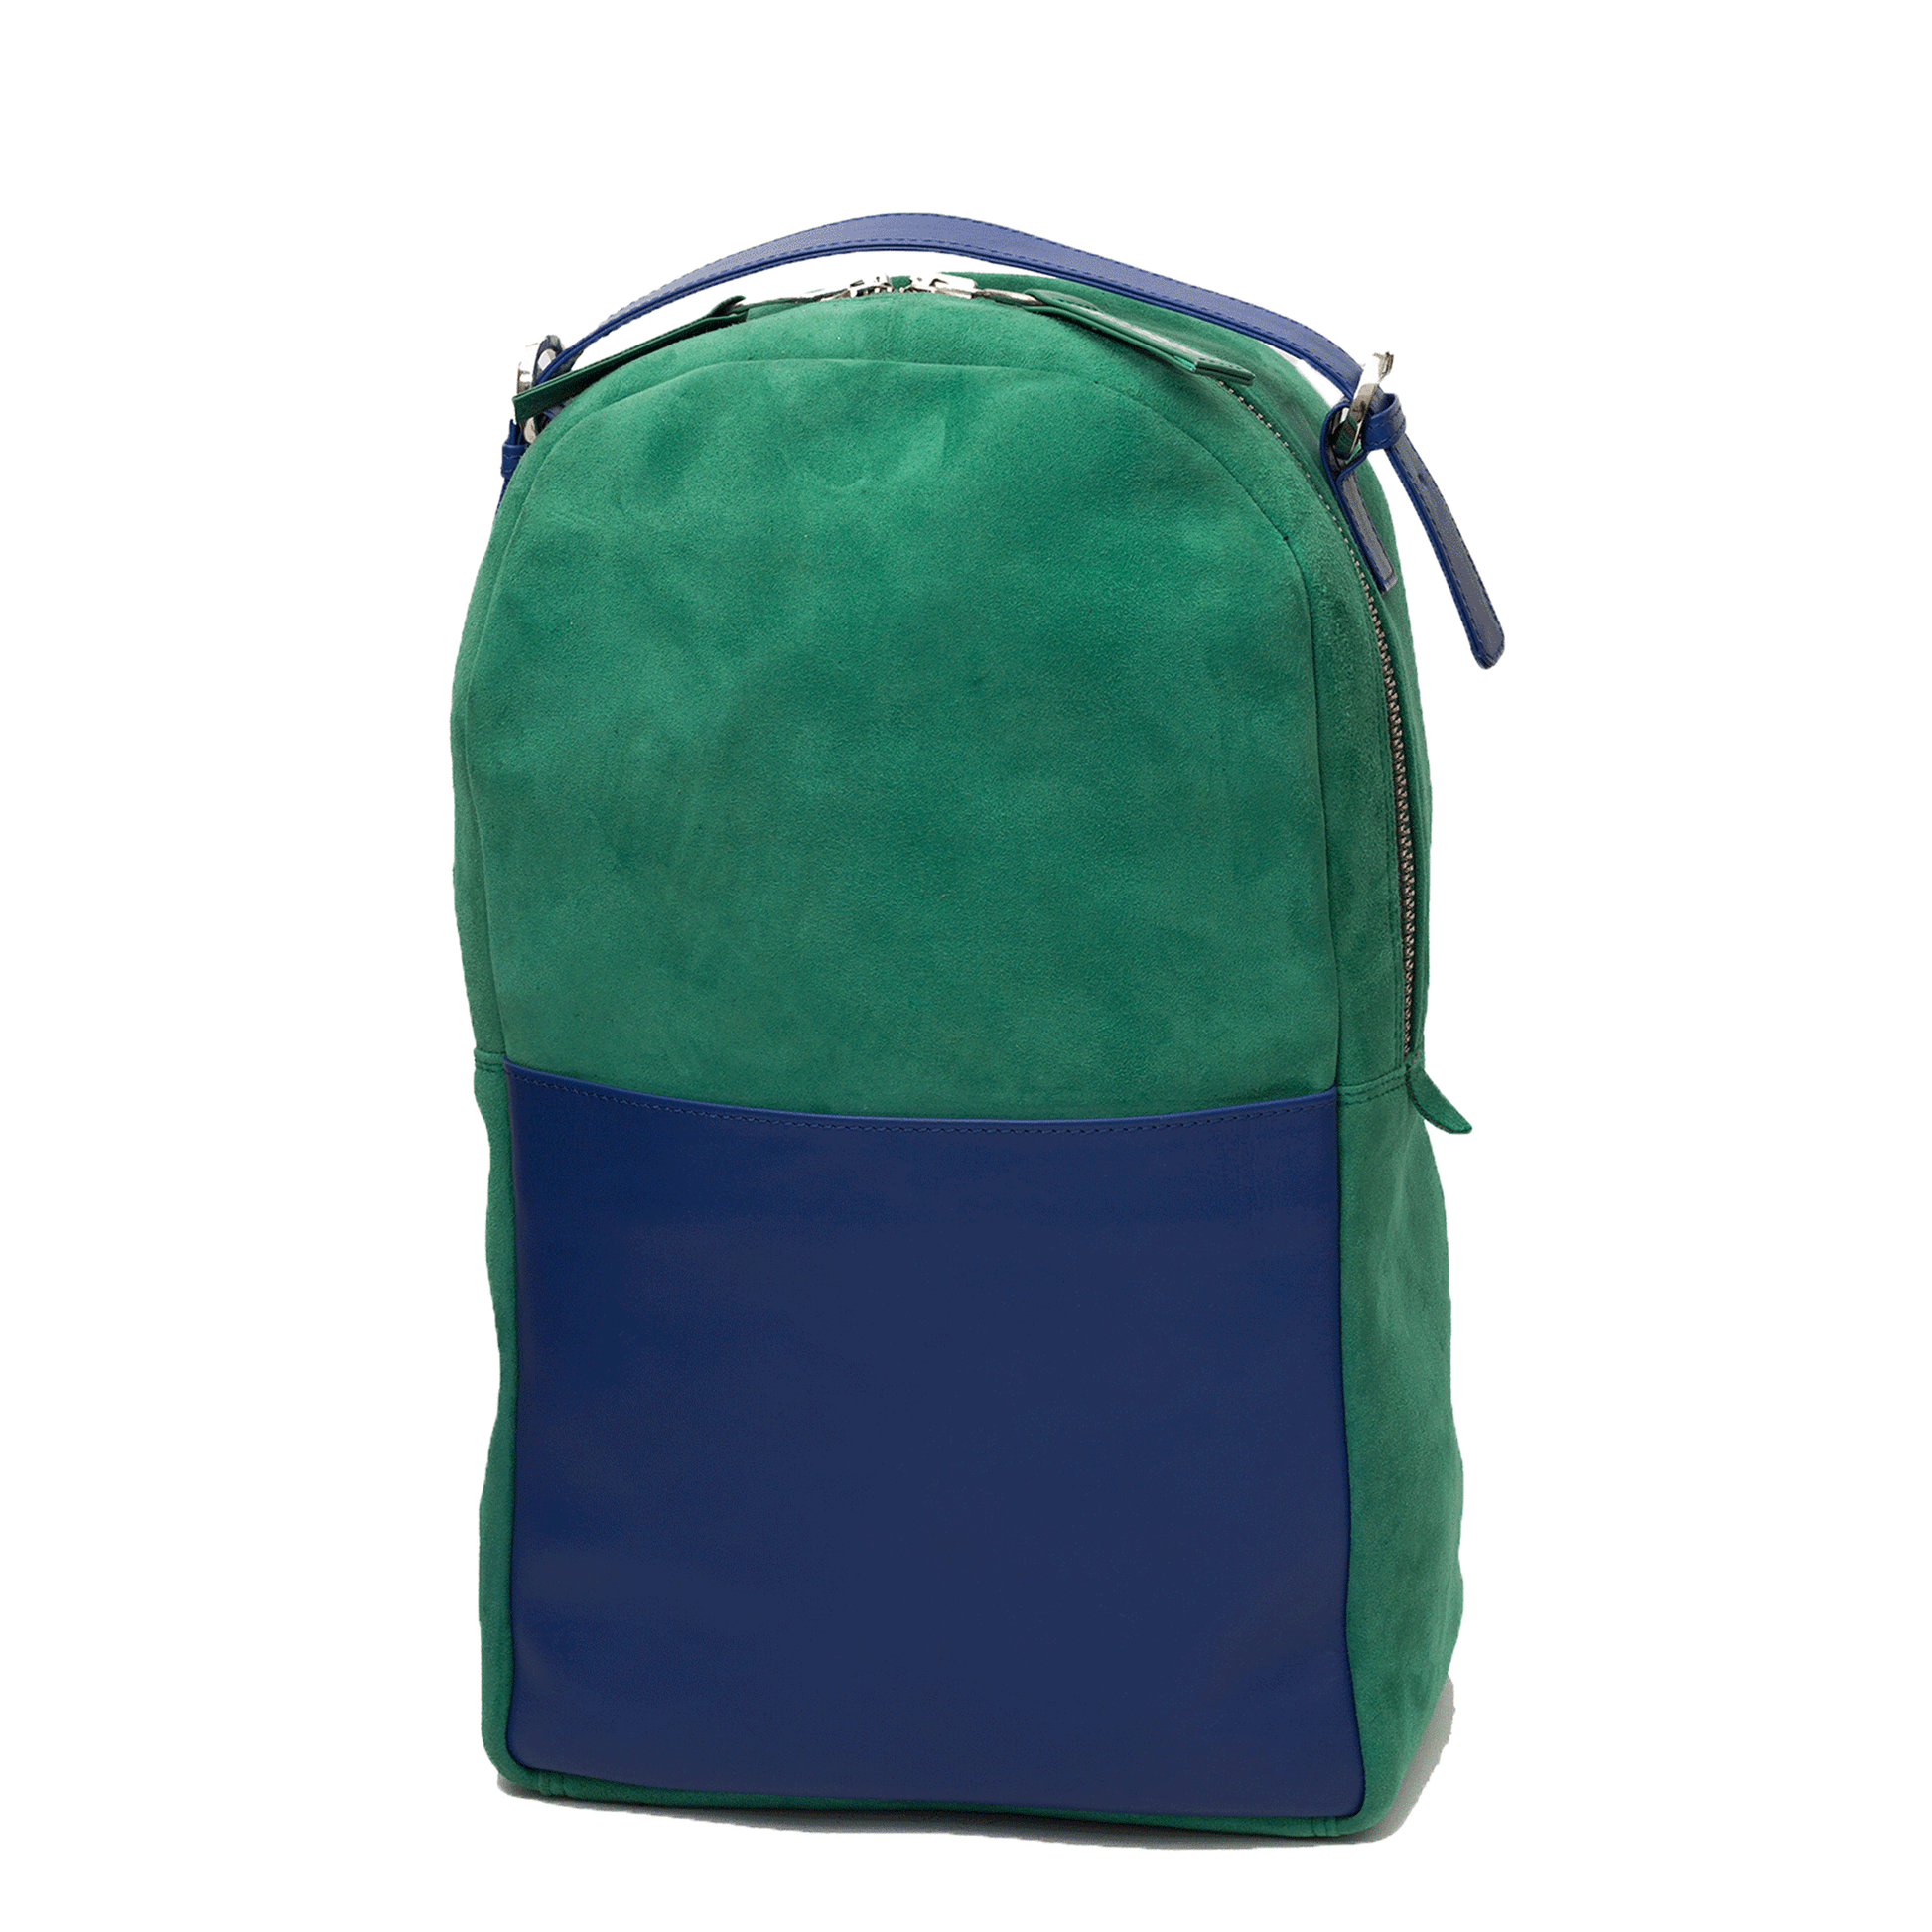 green and blue leather backpack 